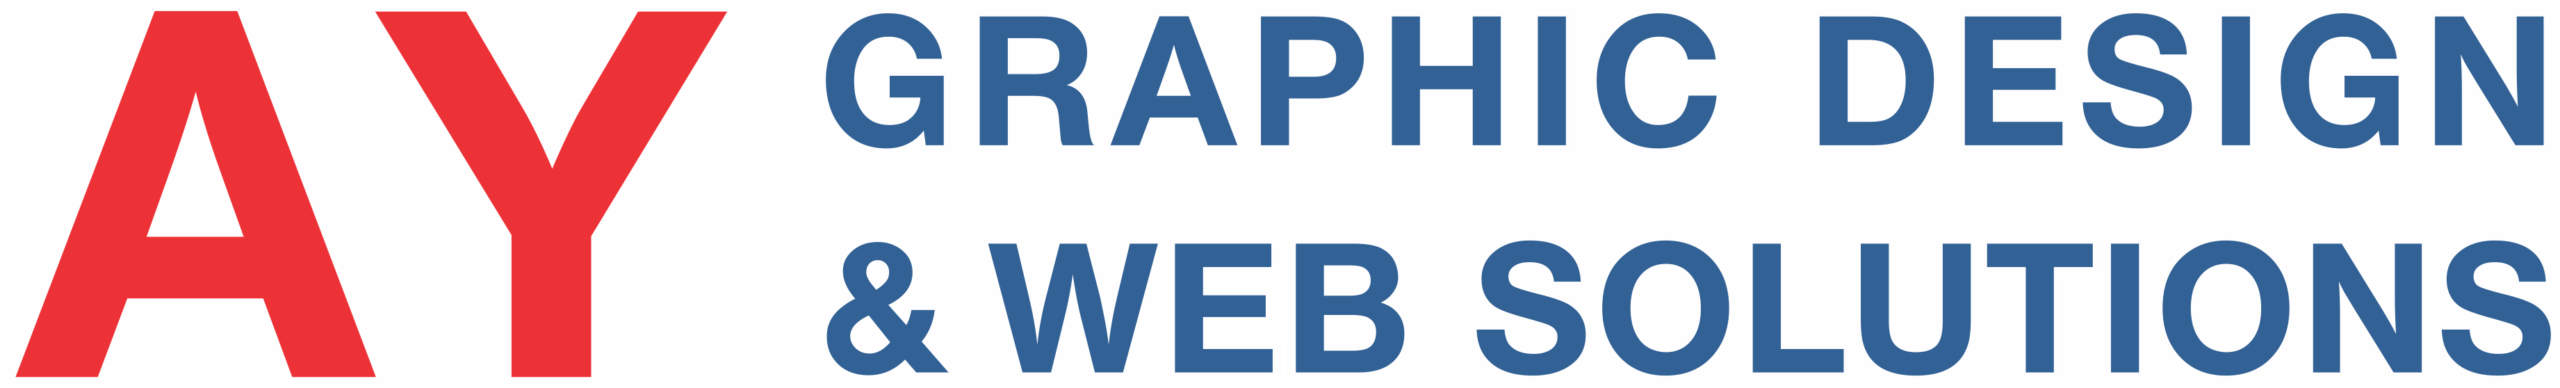 AY Graphic Design & Web Solutions